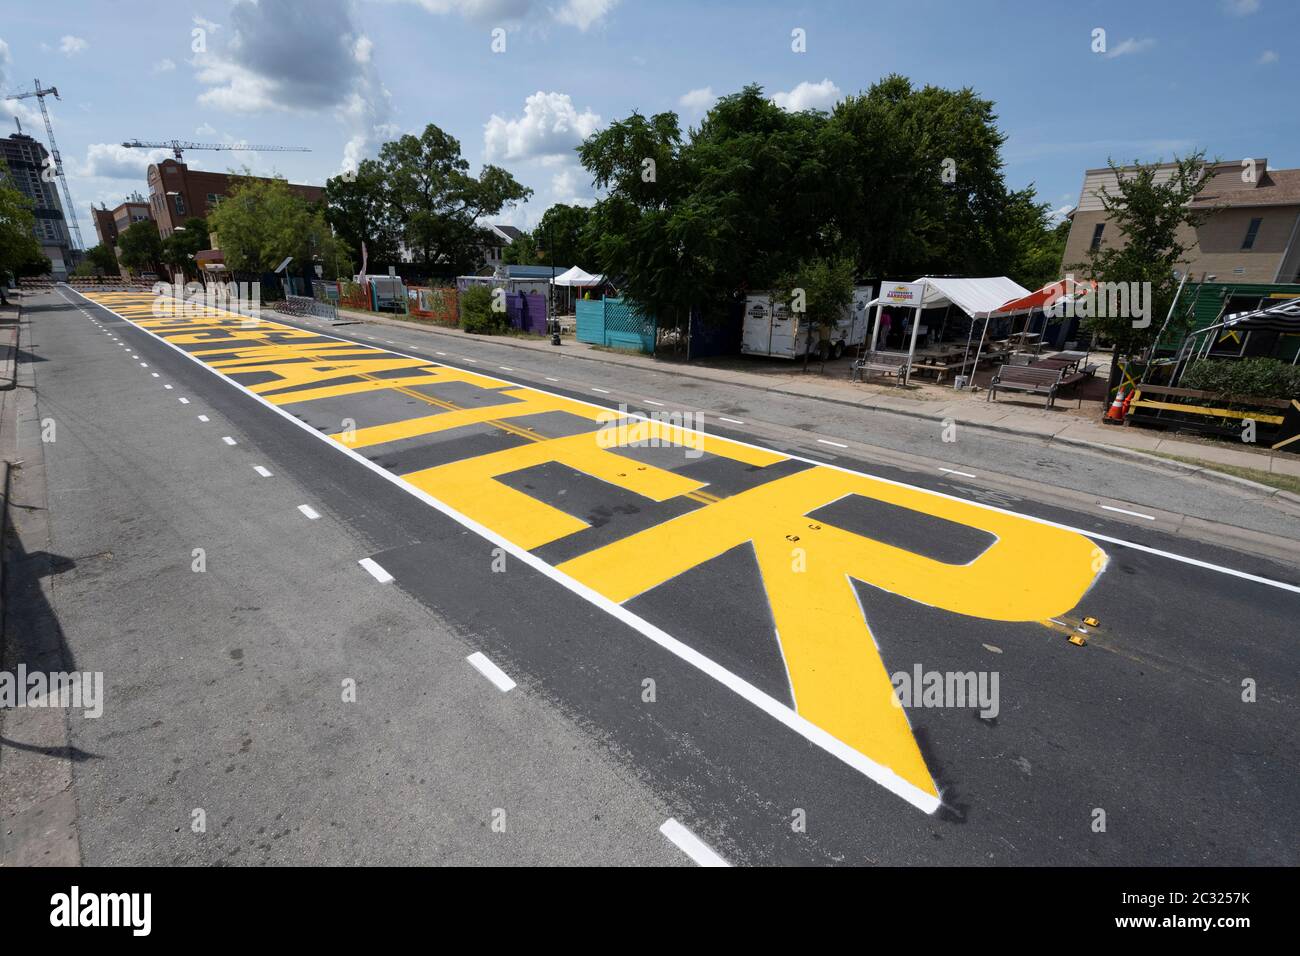 Austin, TX USA June 18, 2020: City of Austin yellow letters spelling 'Black Artists Matter' are painted in the historically black neighborhood of East 11th Street in Austin after a coalition of artists and activists finished the mural. The painting came two days after the same group painted 'Black Austin Matters' on Austin's Main Street, Congress Avenue.Credit: ATXN via Bob Daemmrich/Alamy Live News Stock Photo